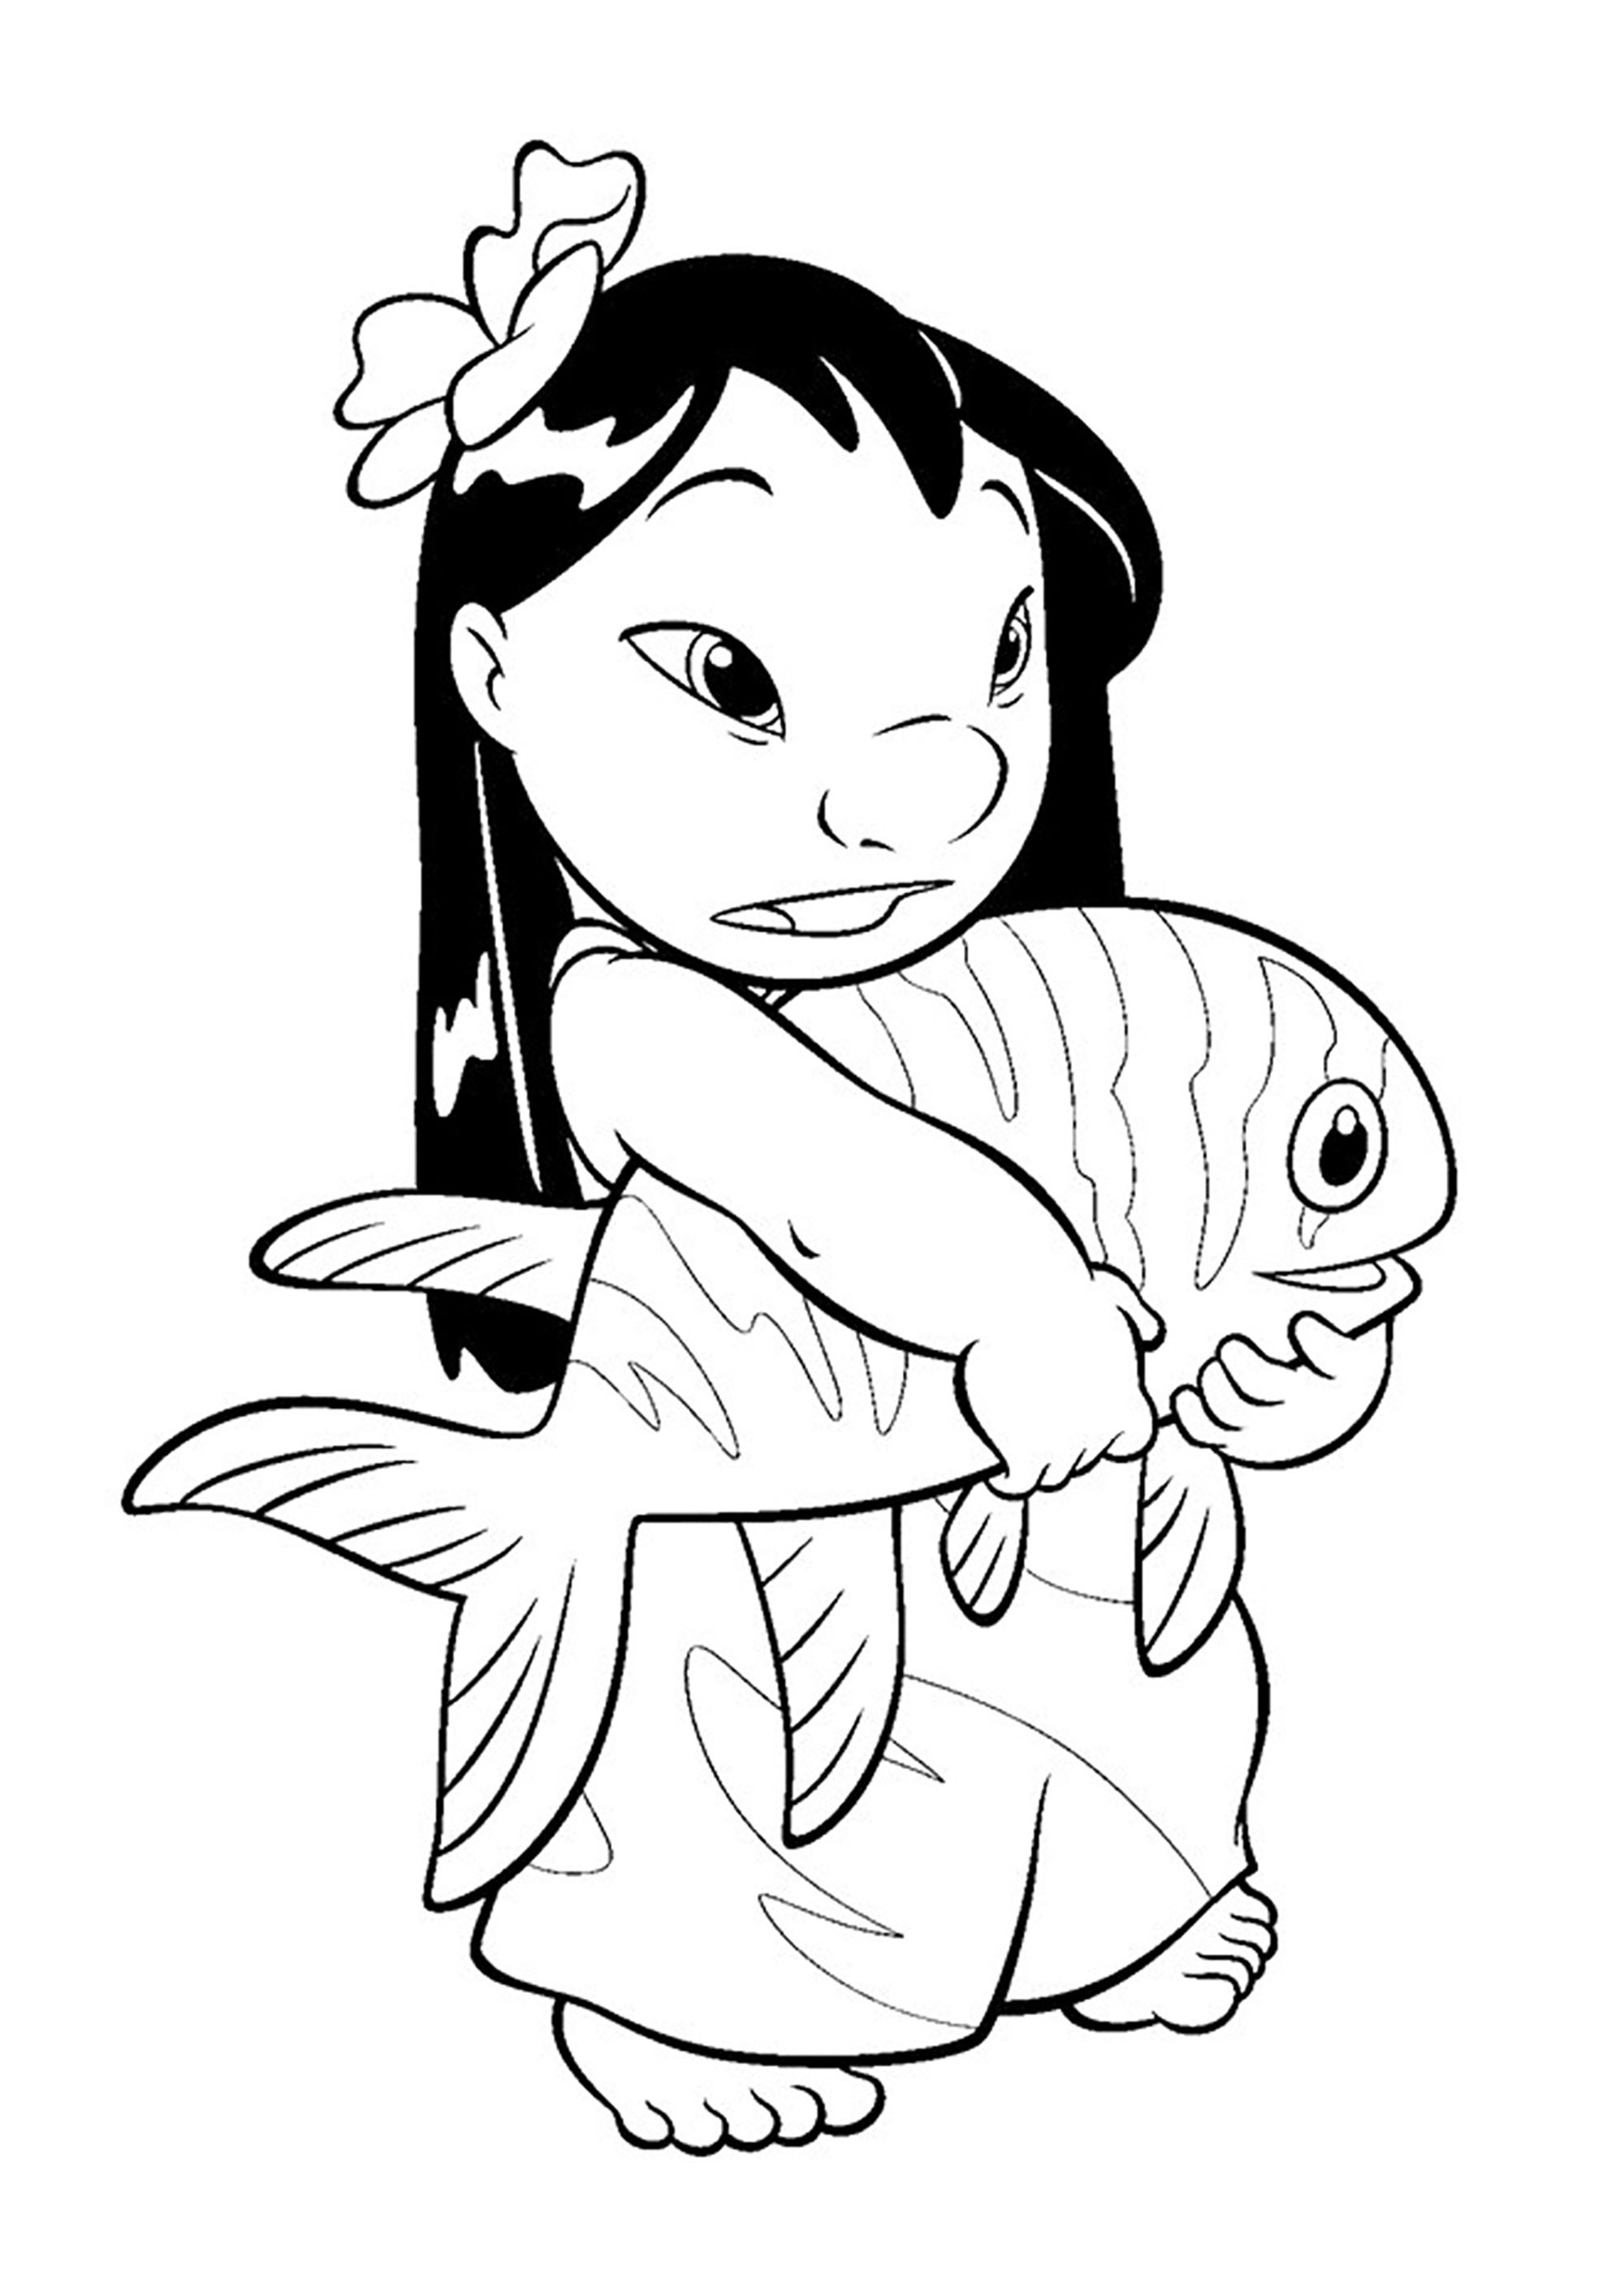 Lilo And Stitch Coloring Pages To Print Lilo And Stitch Kids Coloring